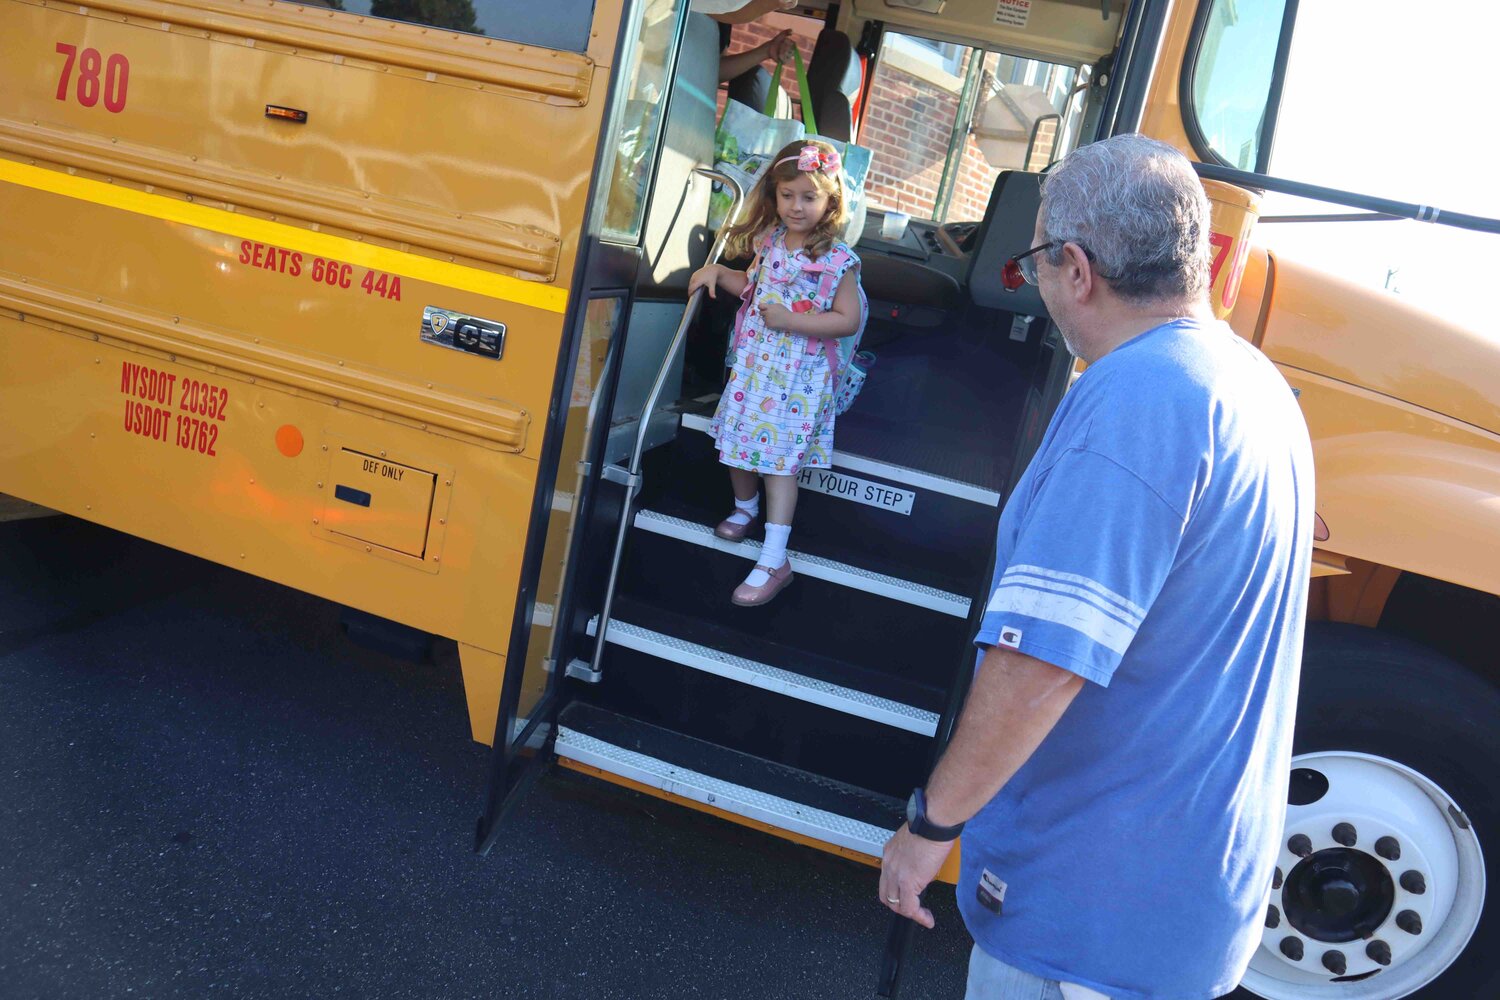 Kindergartener Zoey Florio was quick to stream off the bus and start the day.